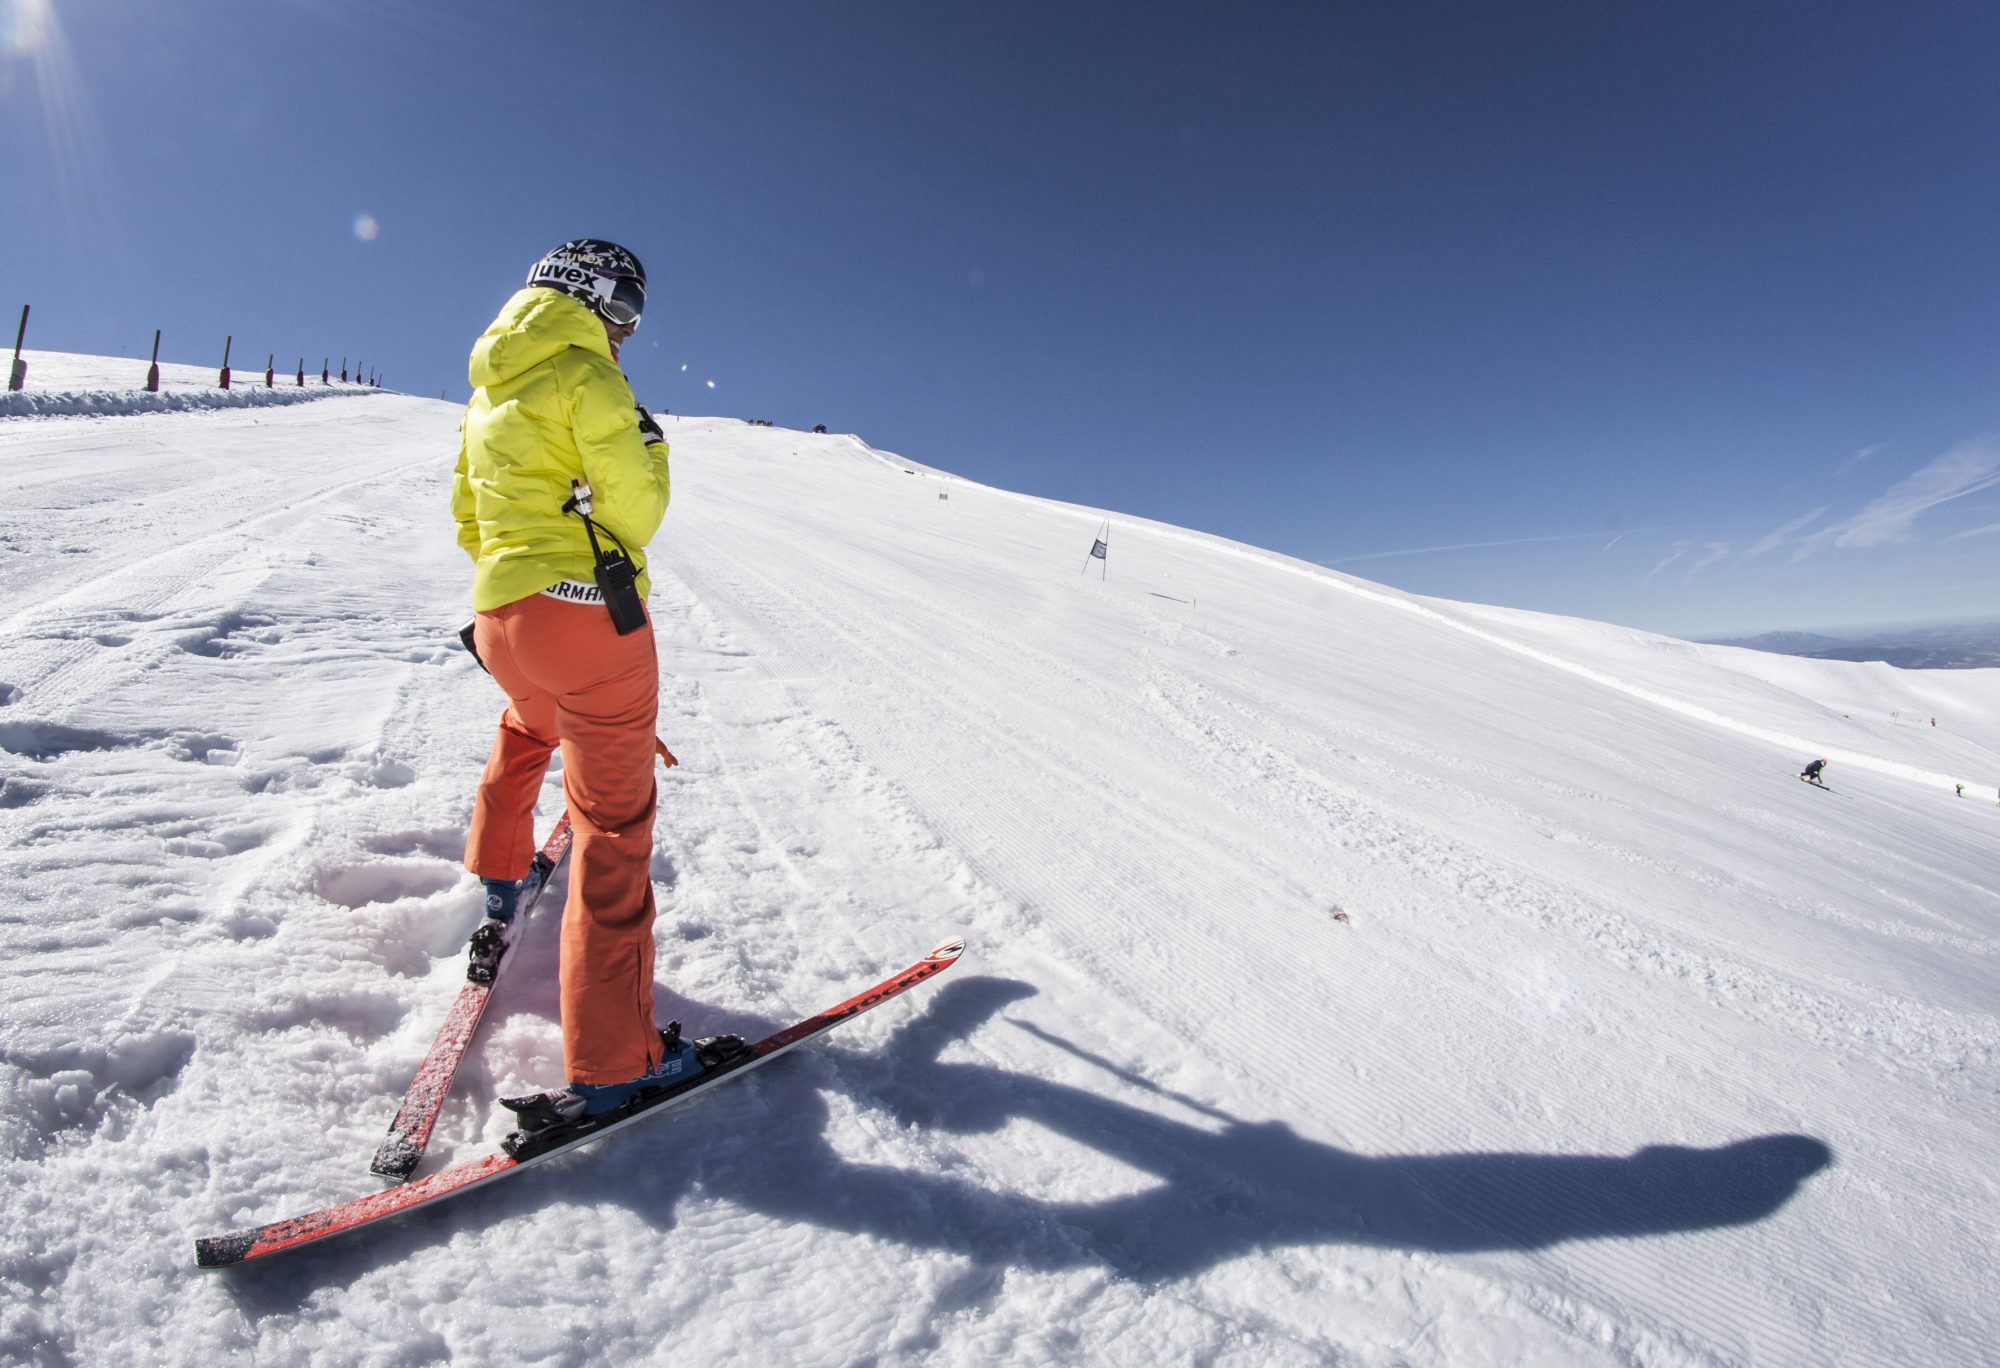 Spring skiing at its best at Sierra Nevada, Spain. Sierra Nevada has 70 km of open pistes until the end of this ski season. Borreguiles area.